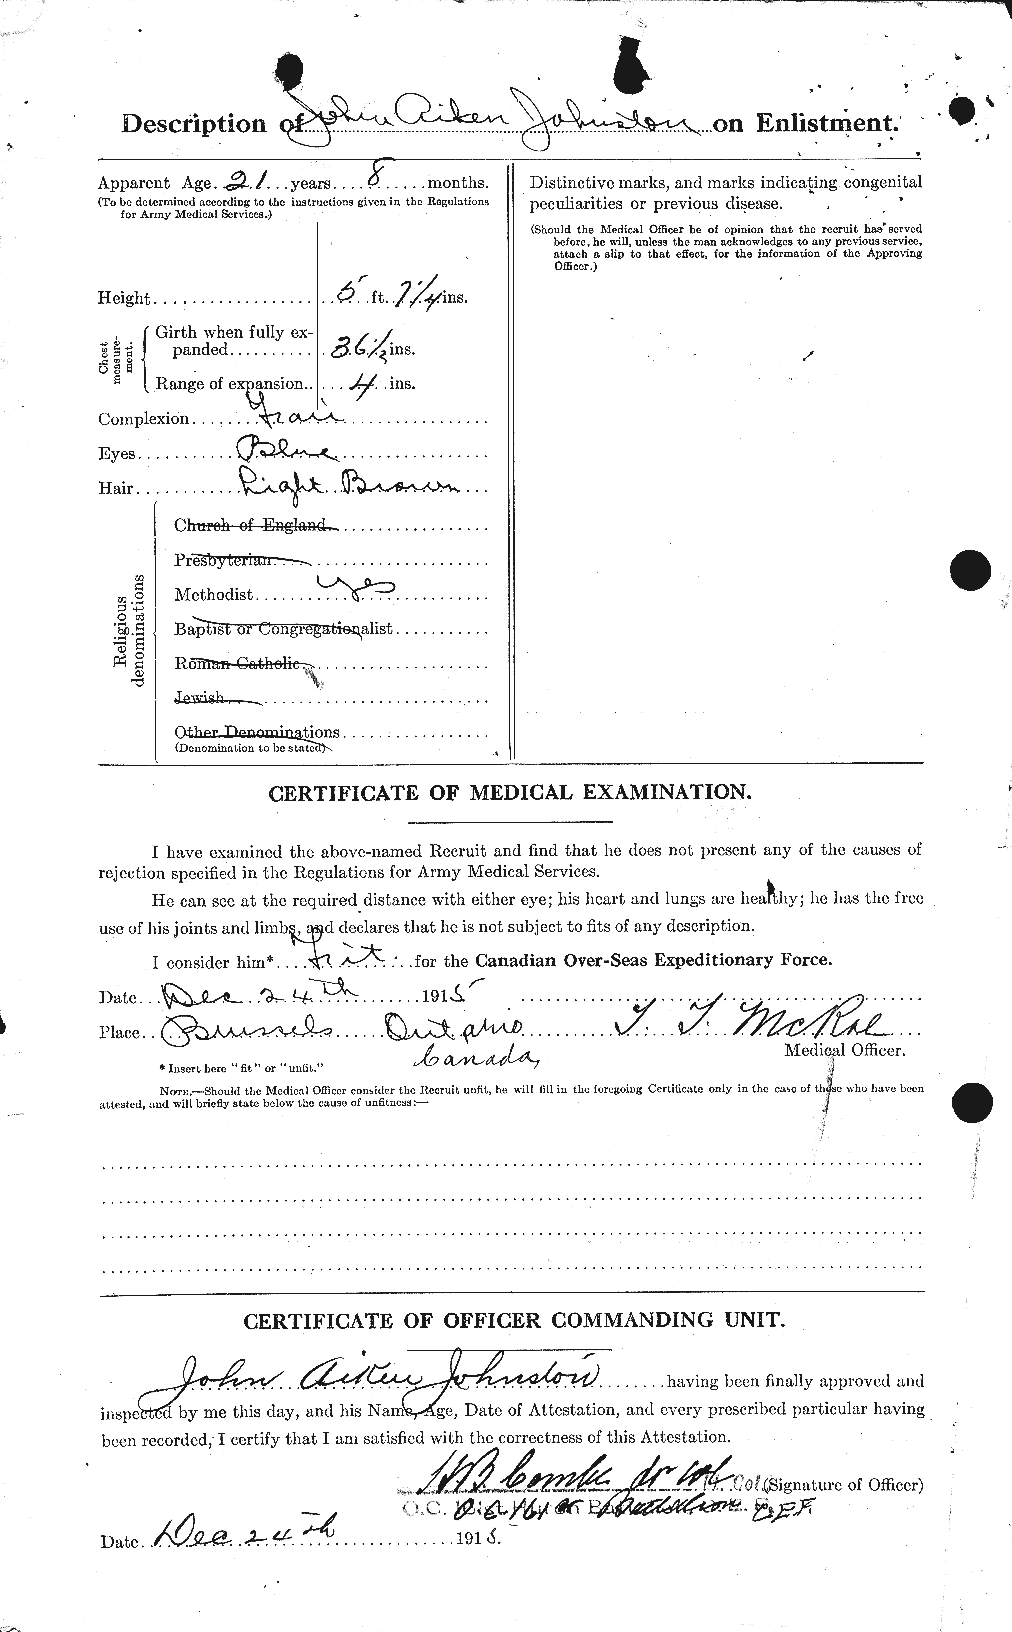 Personnel Records of the First World War - CEF 422805b